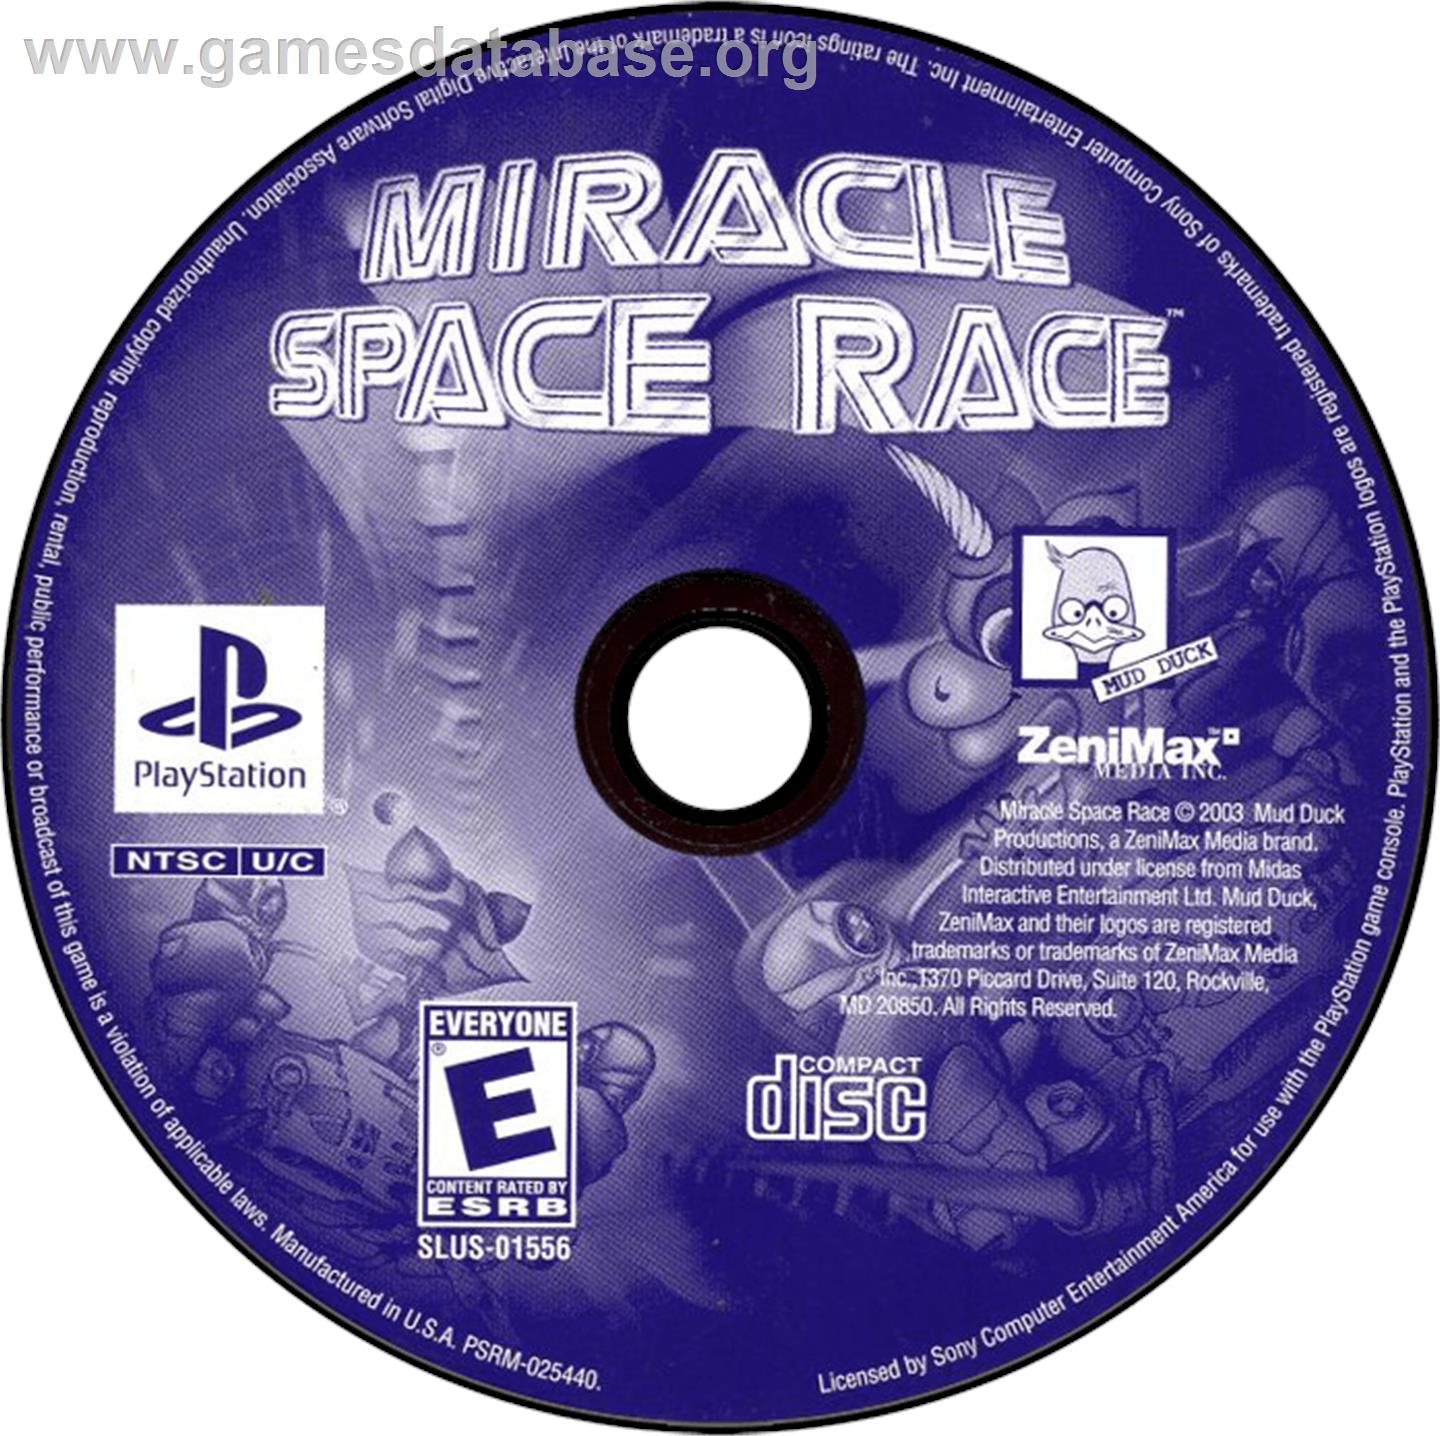 Miracle Space Race - Sony Playstation - Artwork - Disc